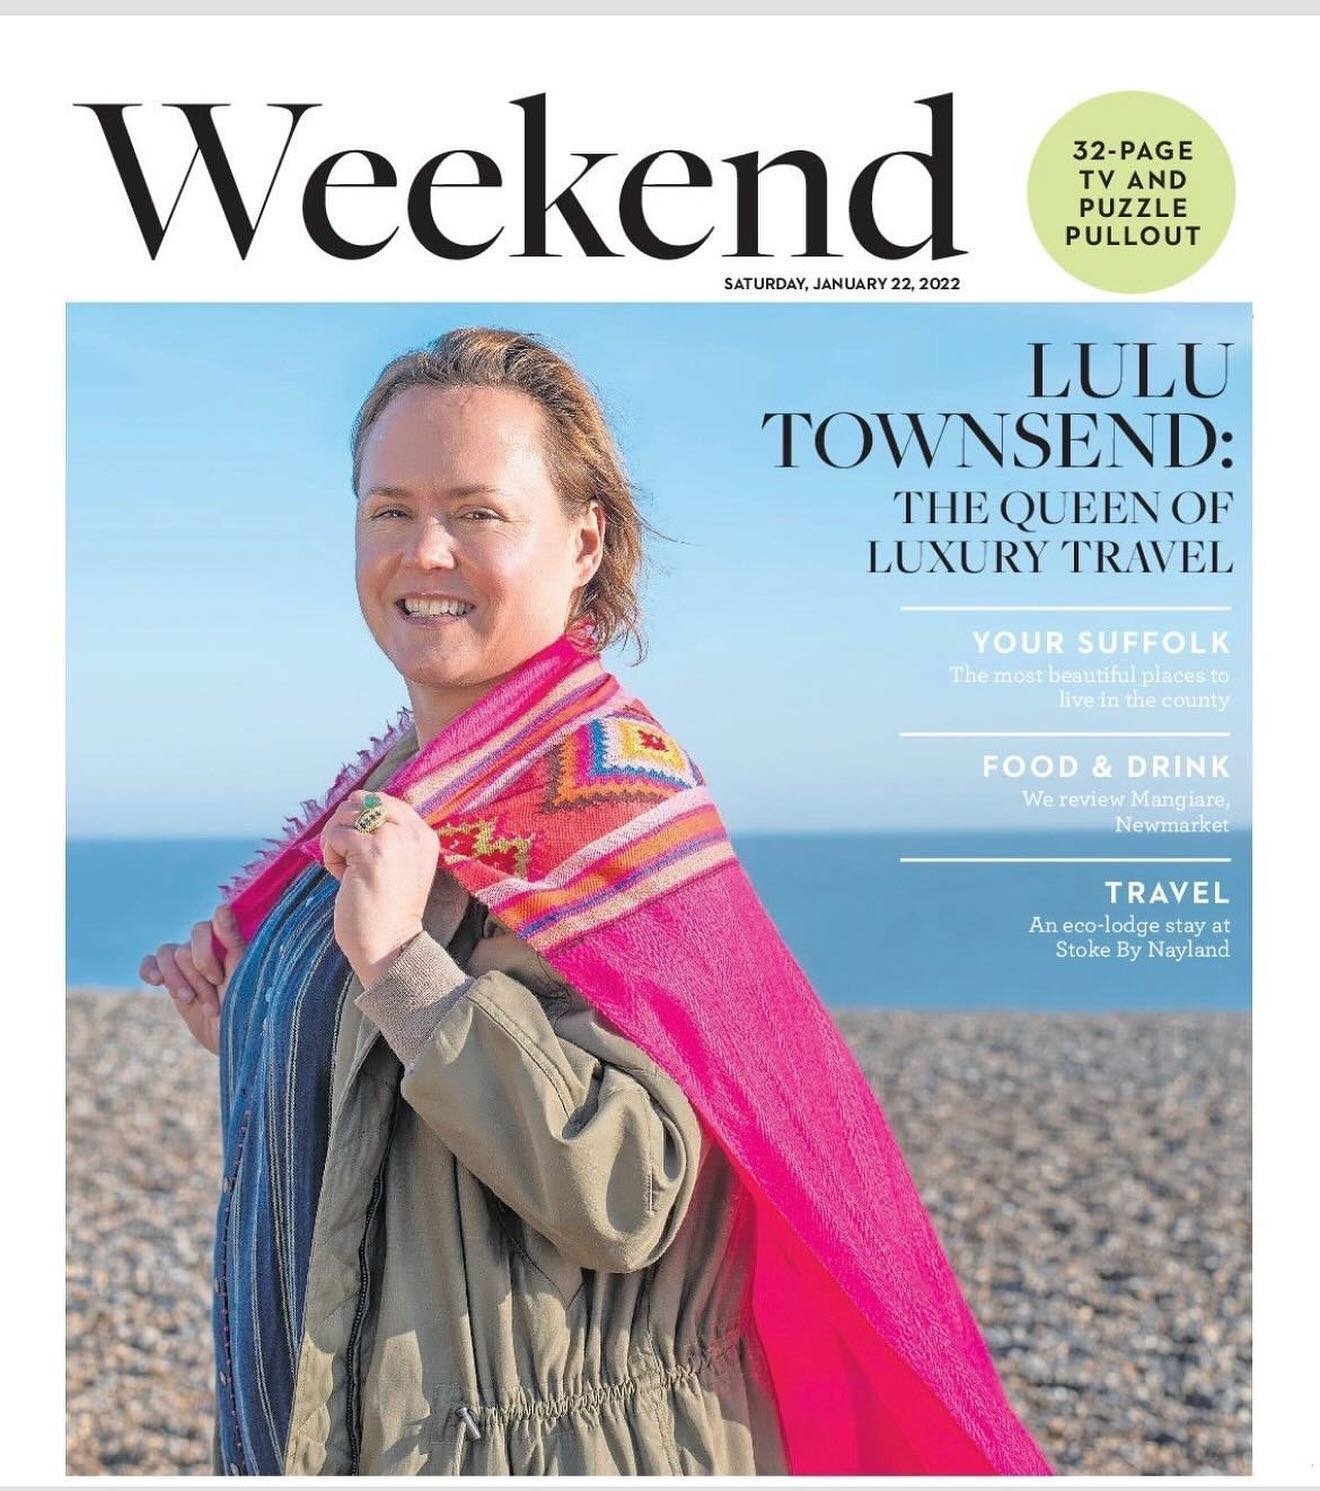 Totally missed the fact I am on the cover! Thanks @sarahlucybrown for pointing that out 🤣🤣🤣 #honoured 🙏🌈💫

#eadt #suffolkgirl #queenoftravel #lulusluxurylifestyle #aldeburgh #luxurytravel #hotelmarketing #lifestylemarketing #travelgram #covergi